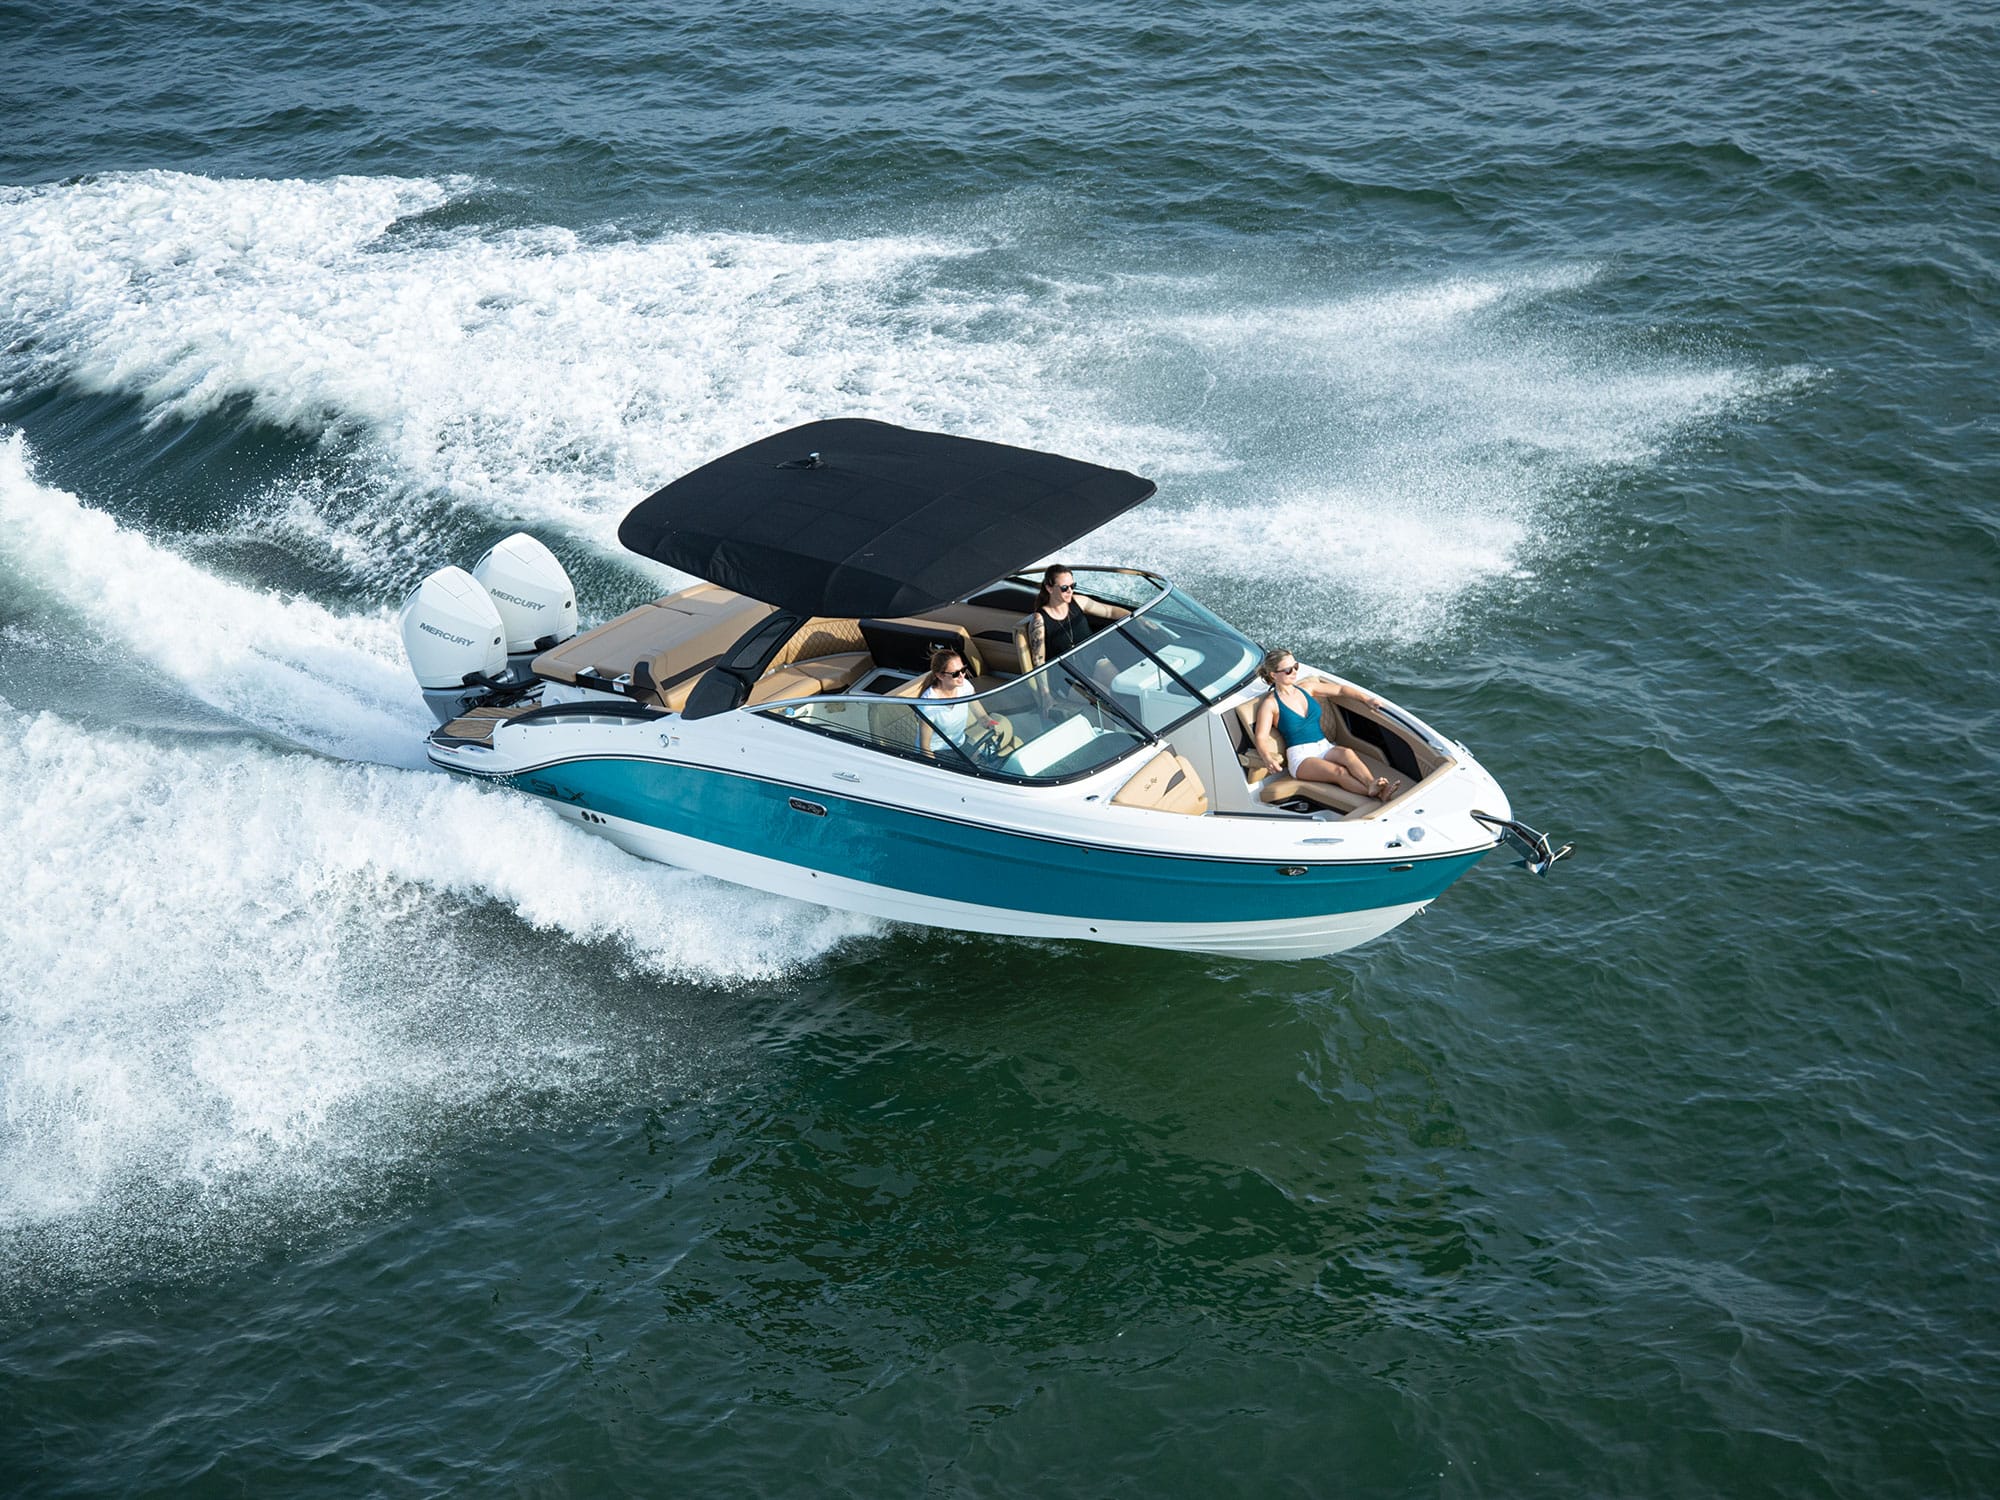 2023 Sea Ray SLX 280 Outboard Boat Test, Pricing, Specs